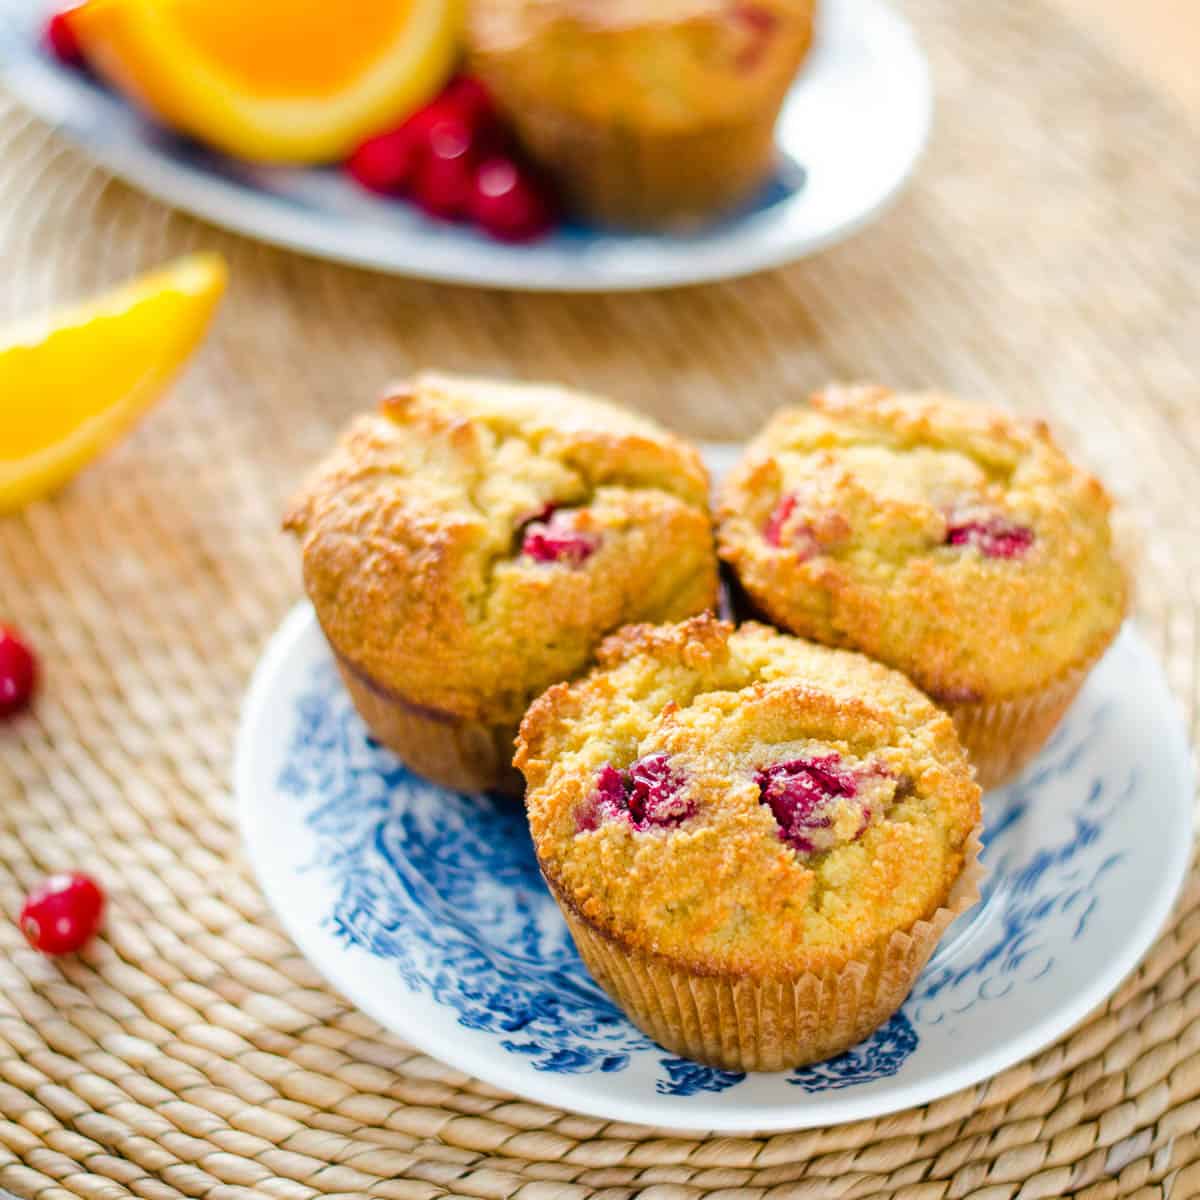 Muffins on plates with orange and cranberries